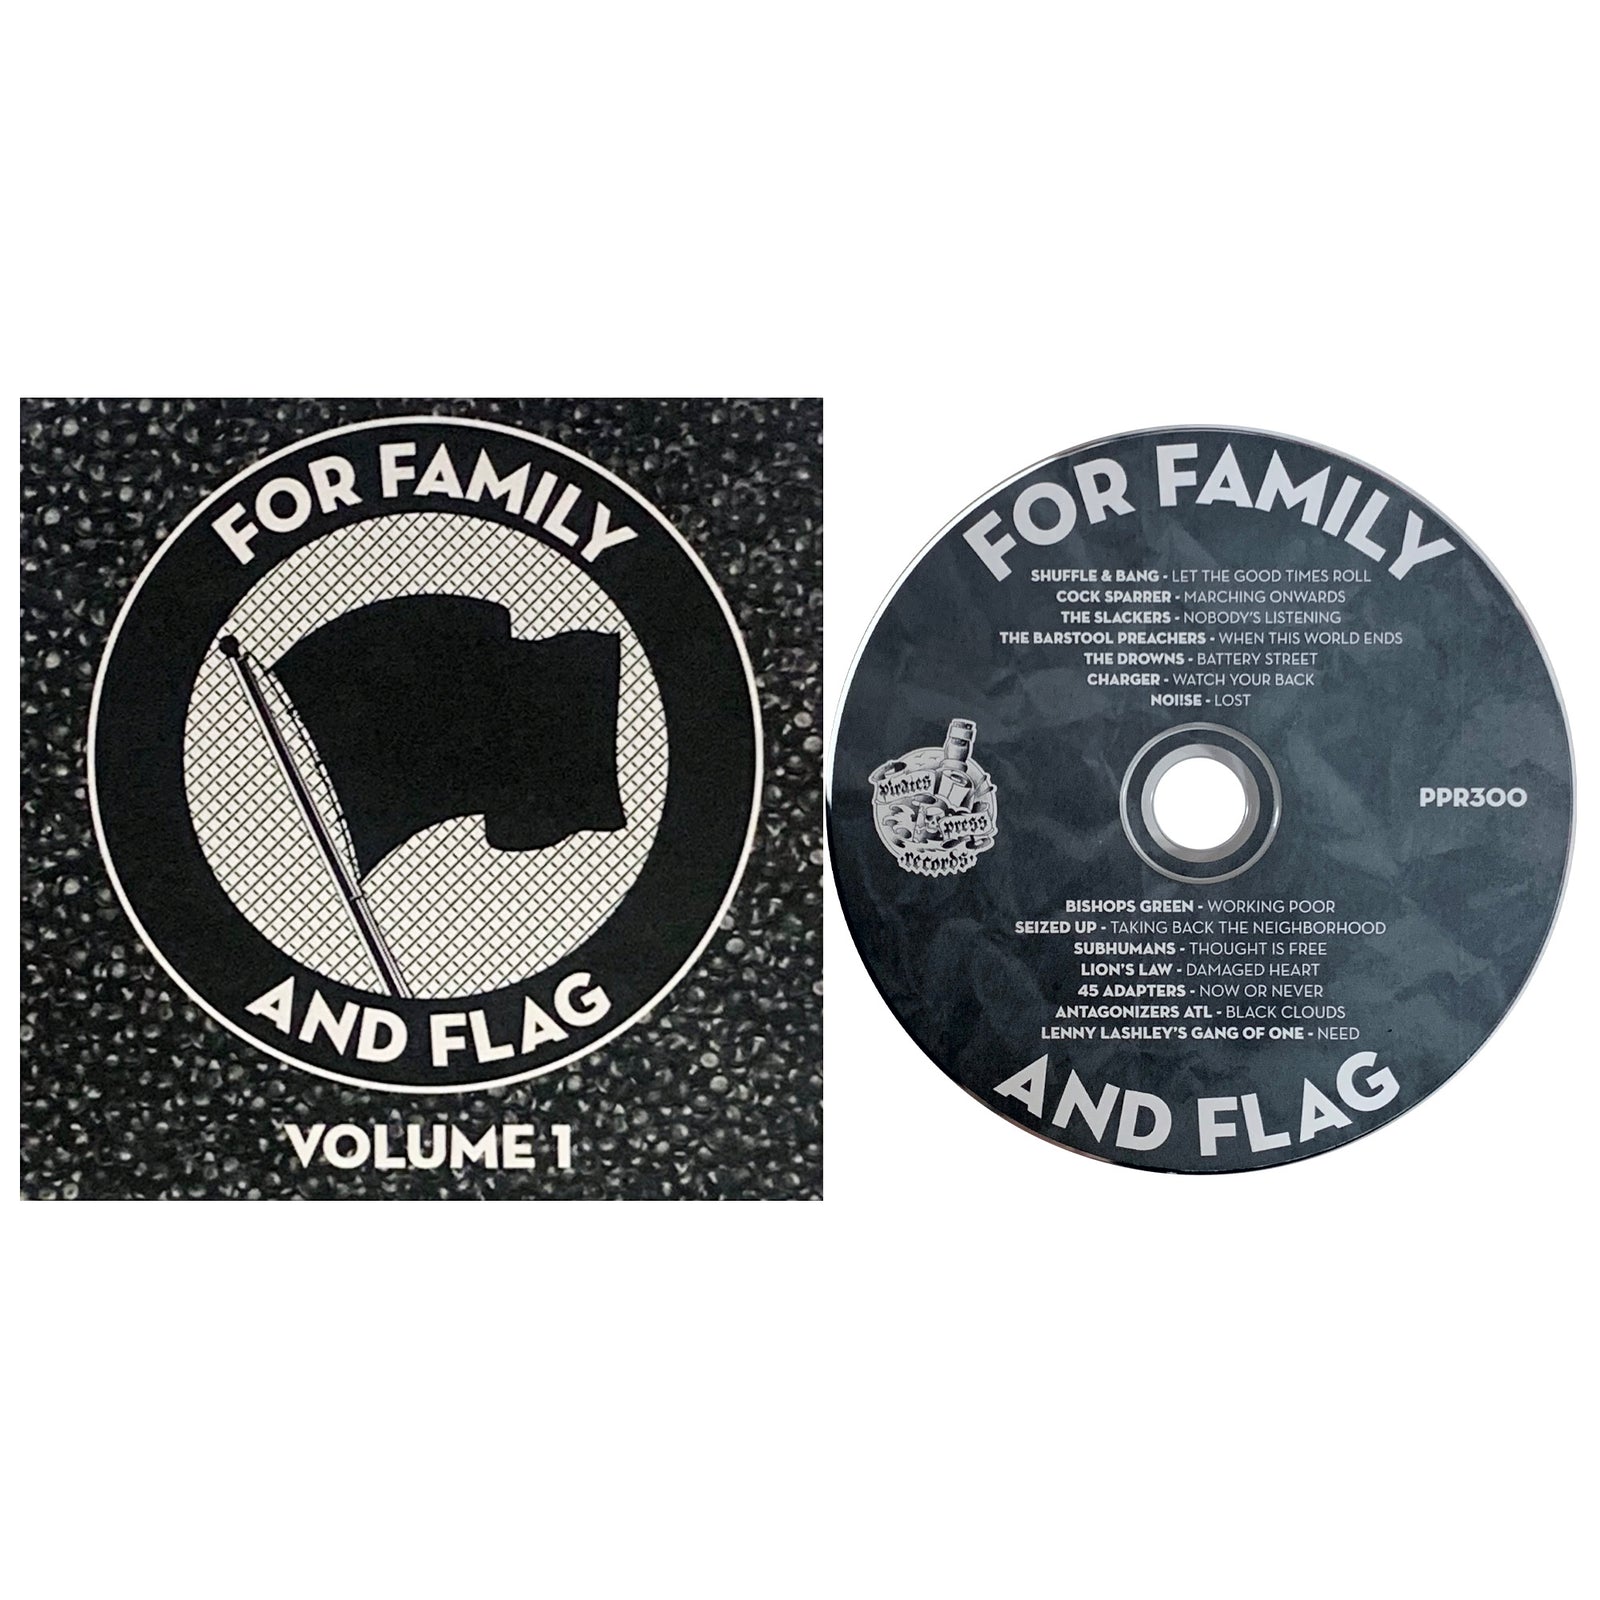 For Family And Flag Vol. 1 CD